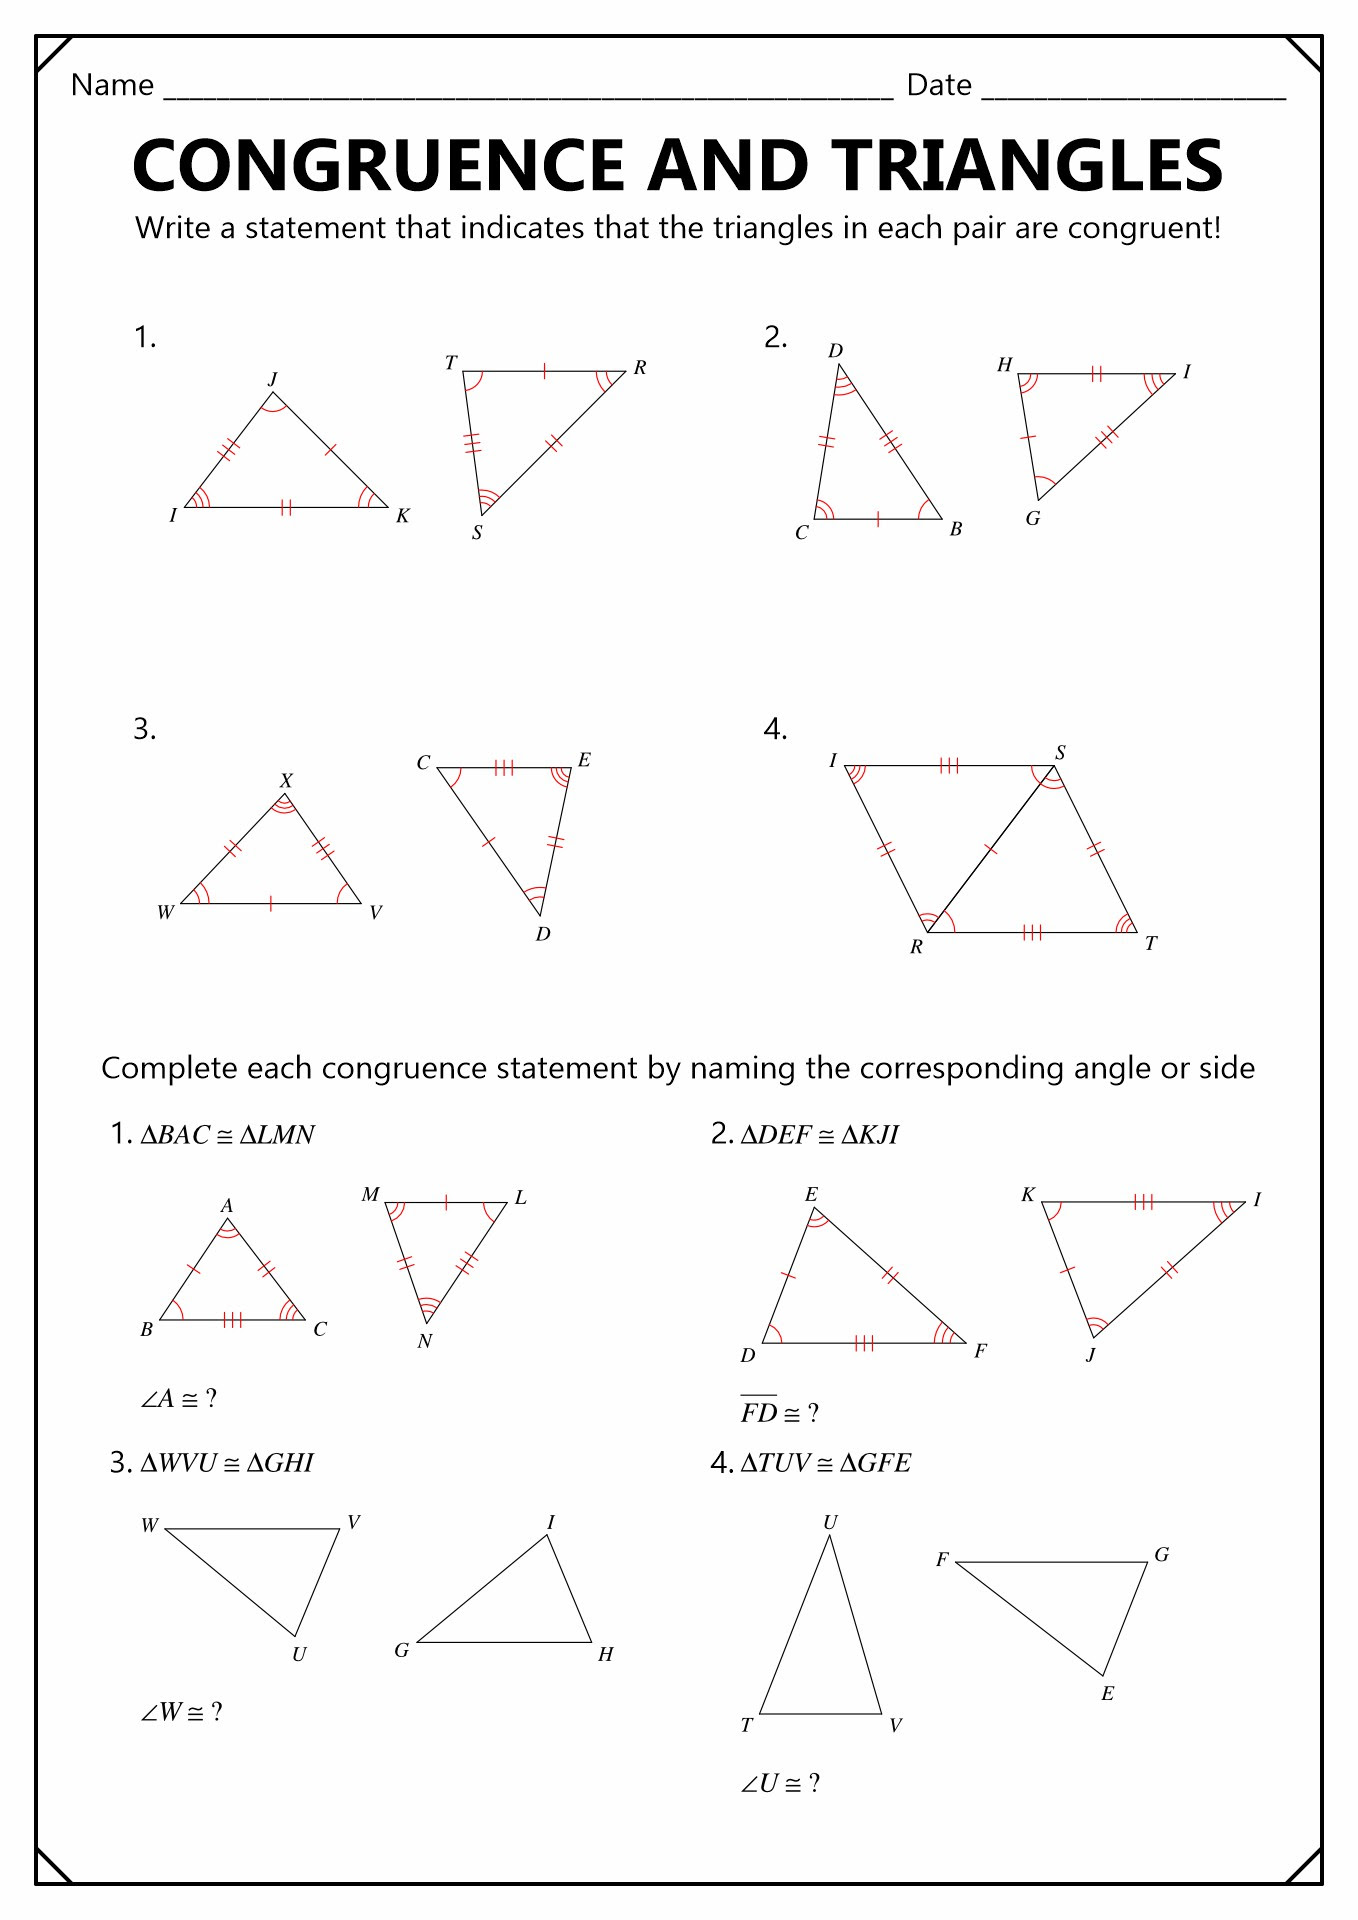 Right Triangle Trig Worksheet Answers - Worksheet List Within Right Triangle Trig Worksheet Answers